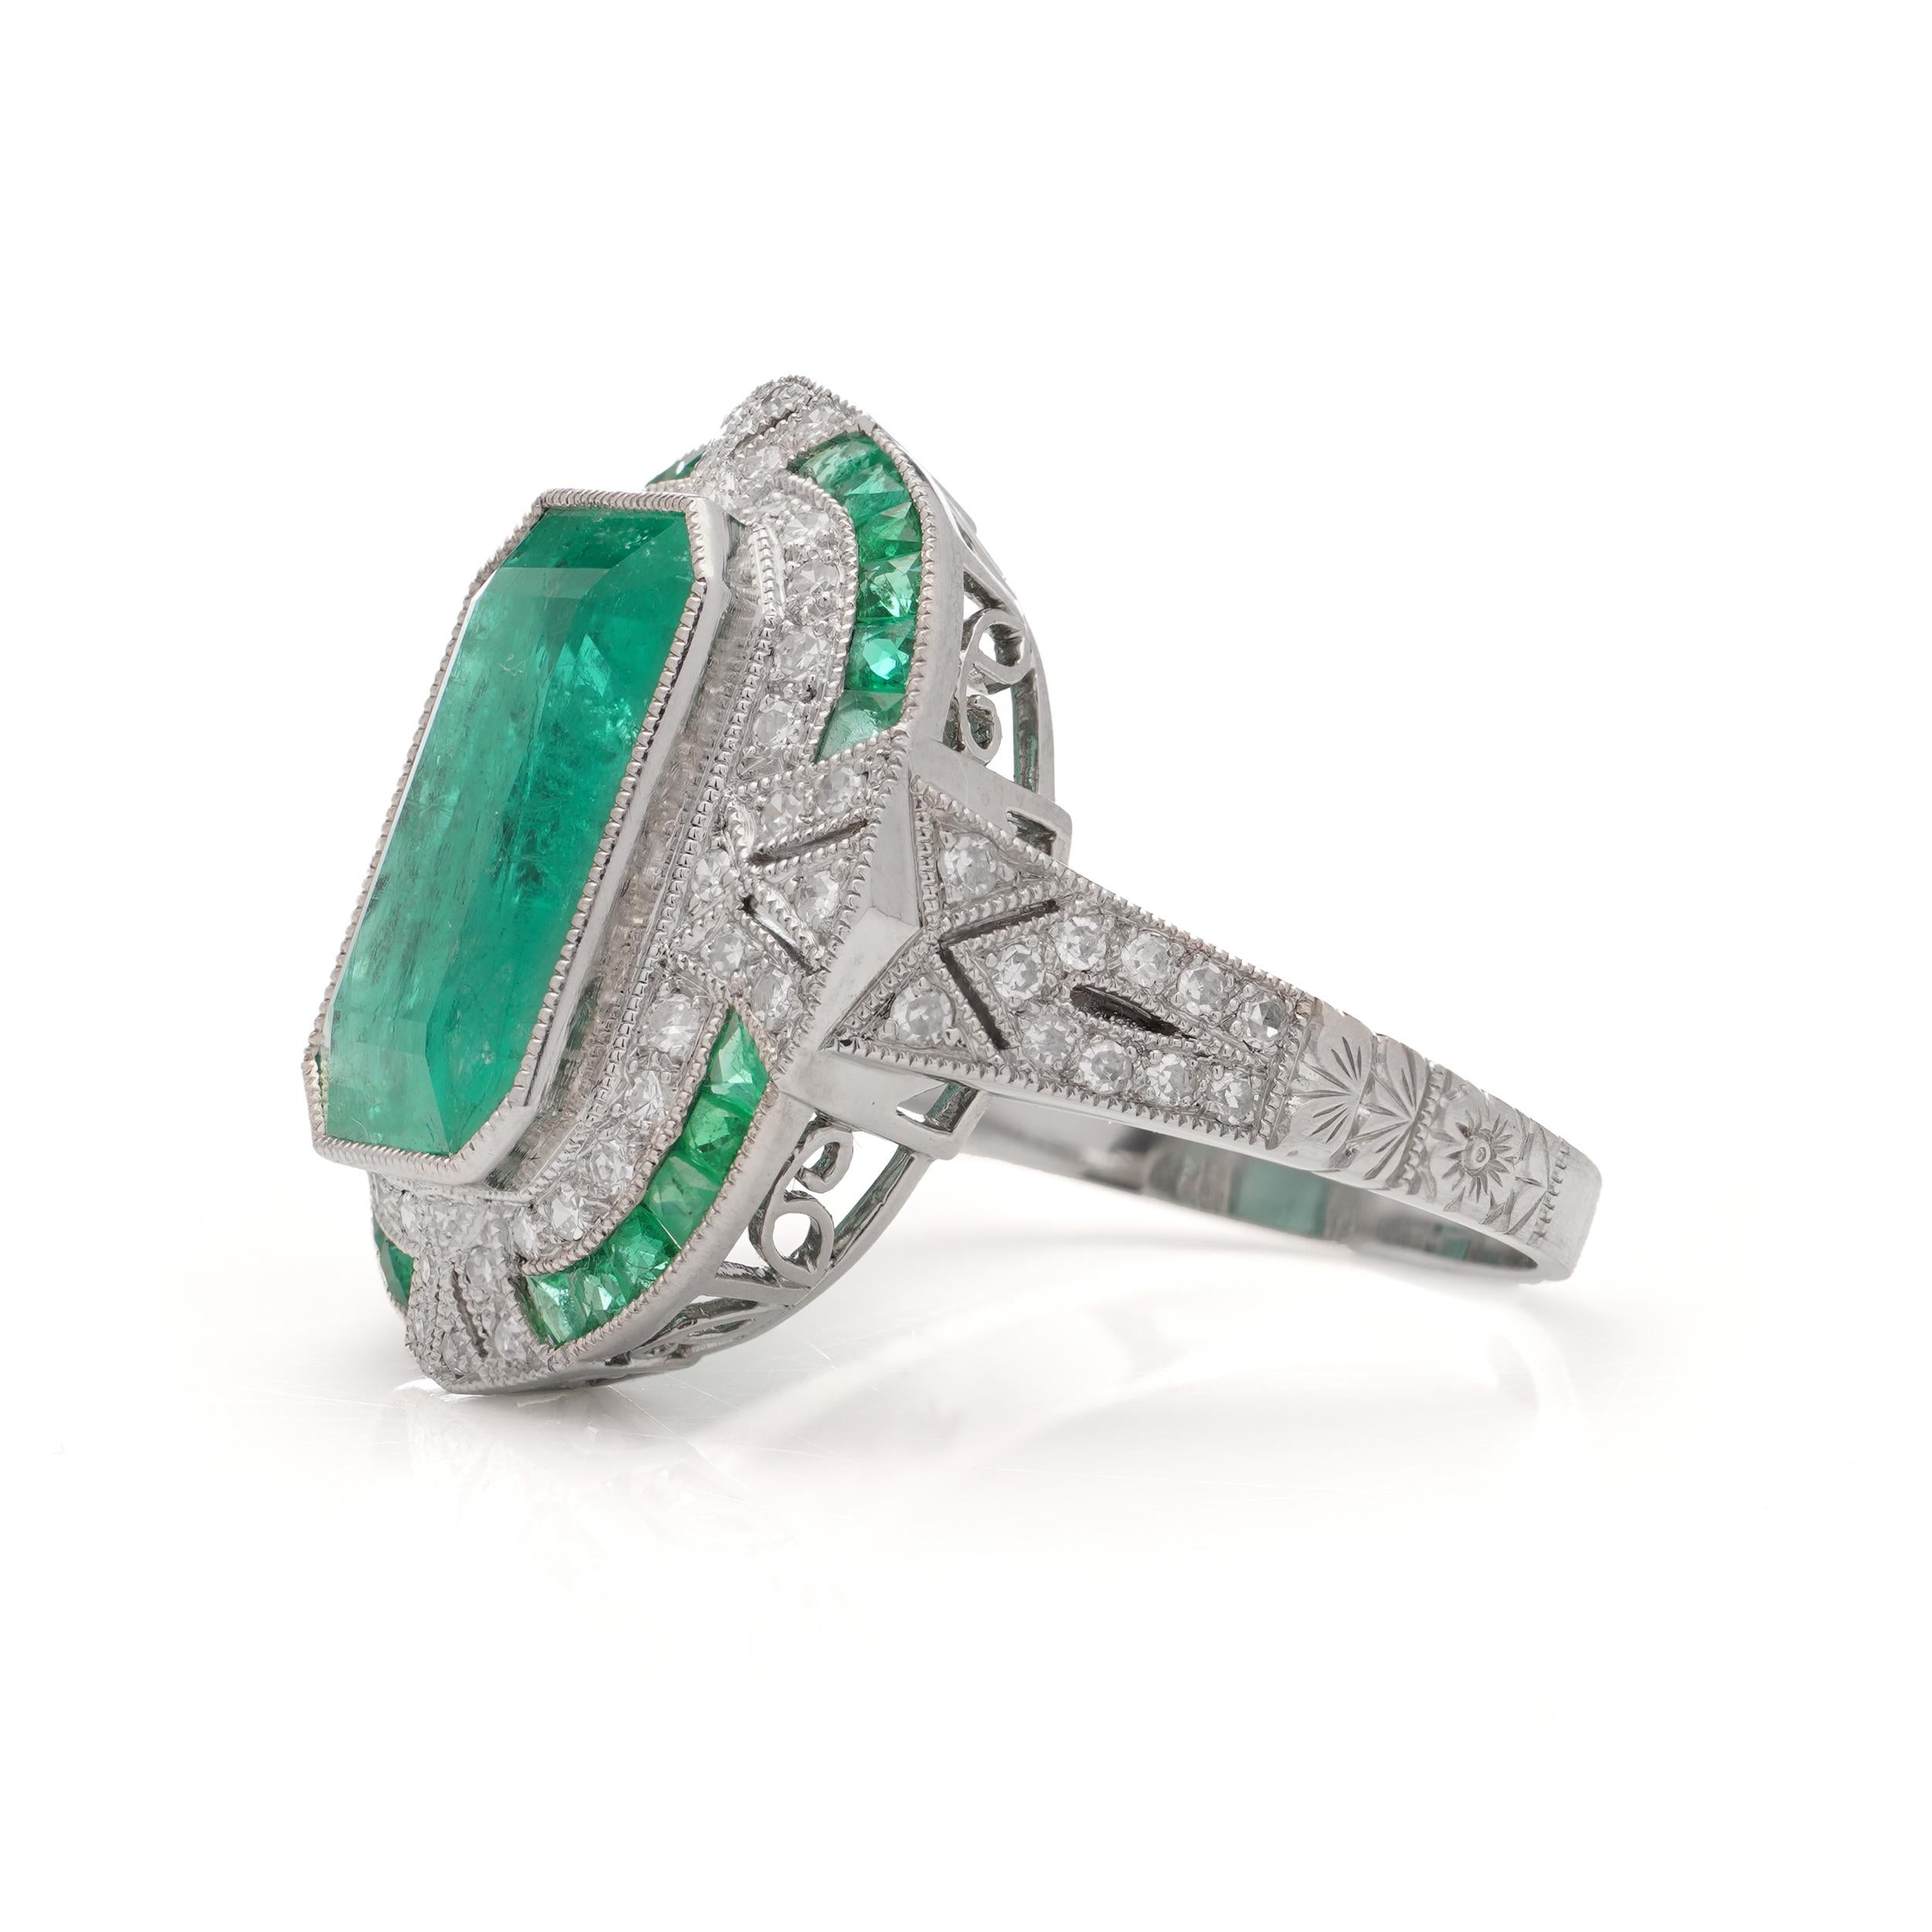 Emerald Cut Platinum Art Deco-inspired 4.21 carats of Emerald fashion ring For Sale